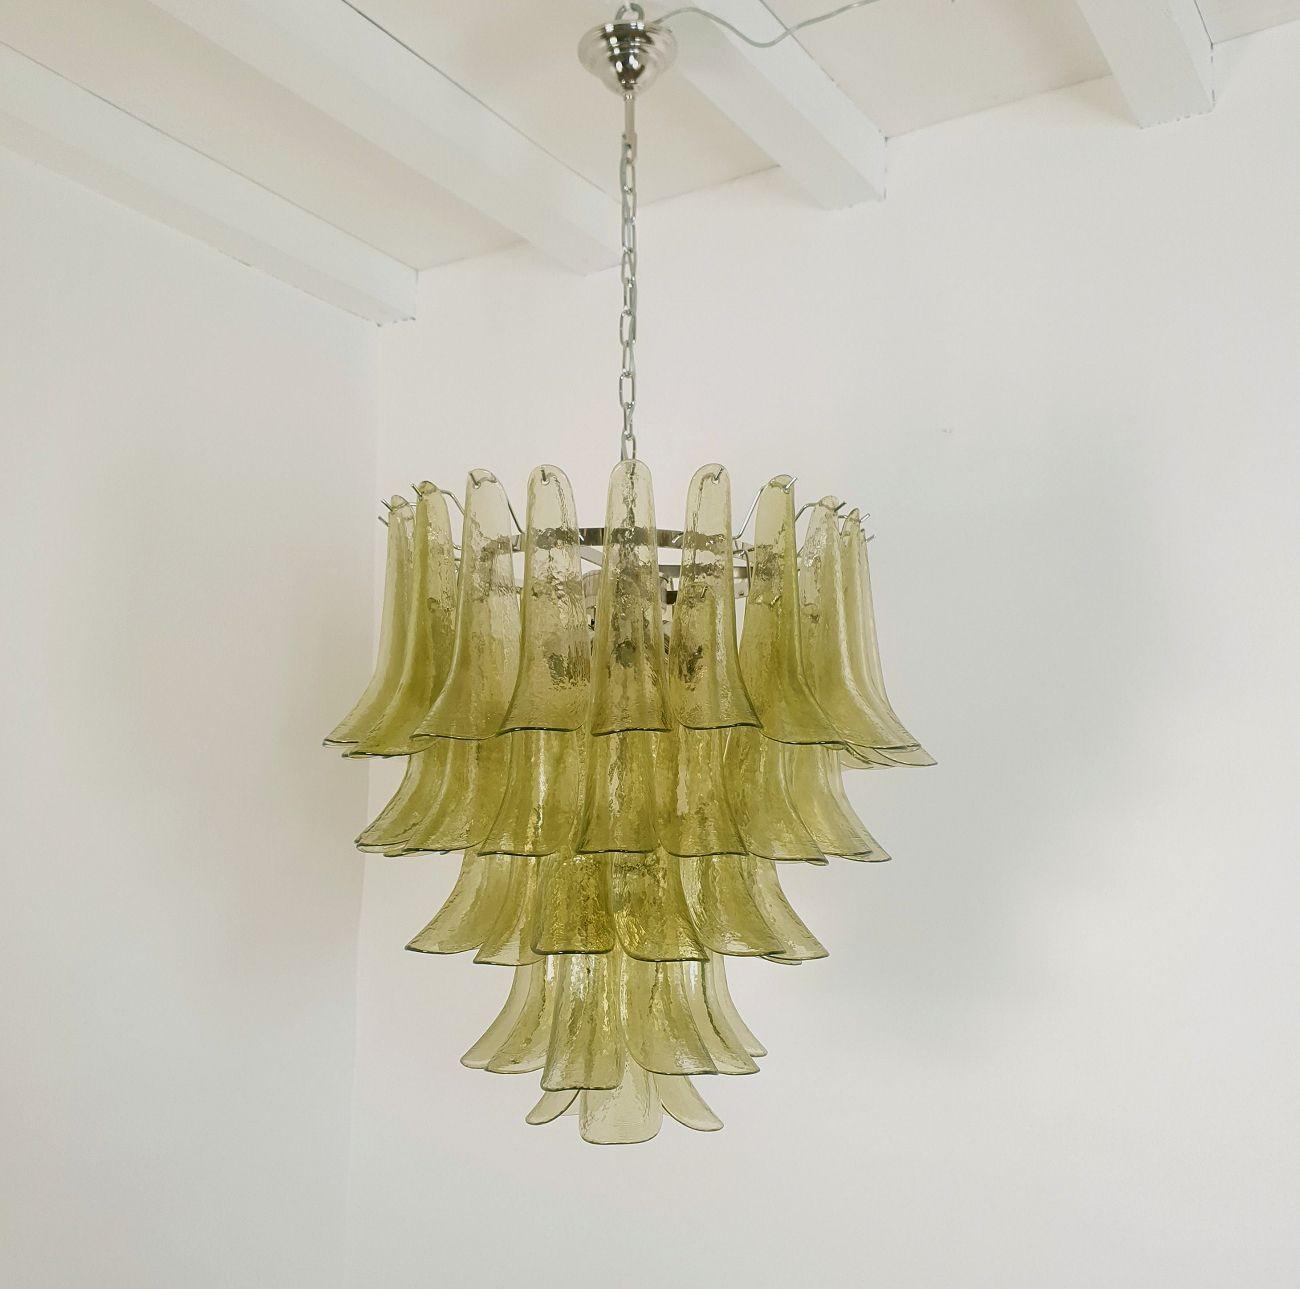 Mid century modern five-tier Green Murano glass chandelier, by Mazzega Italy 1970s.
Two chandeliers - a pair available.
Priced and sold individually.
The Vintage Murano chandelier is made of delicate handmade olive green glass, and a chrome